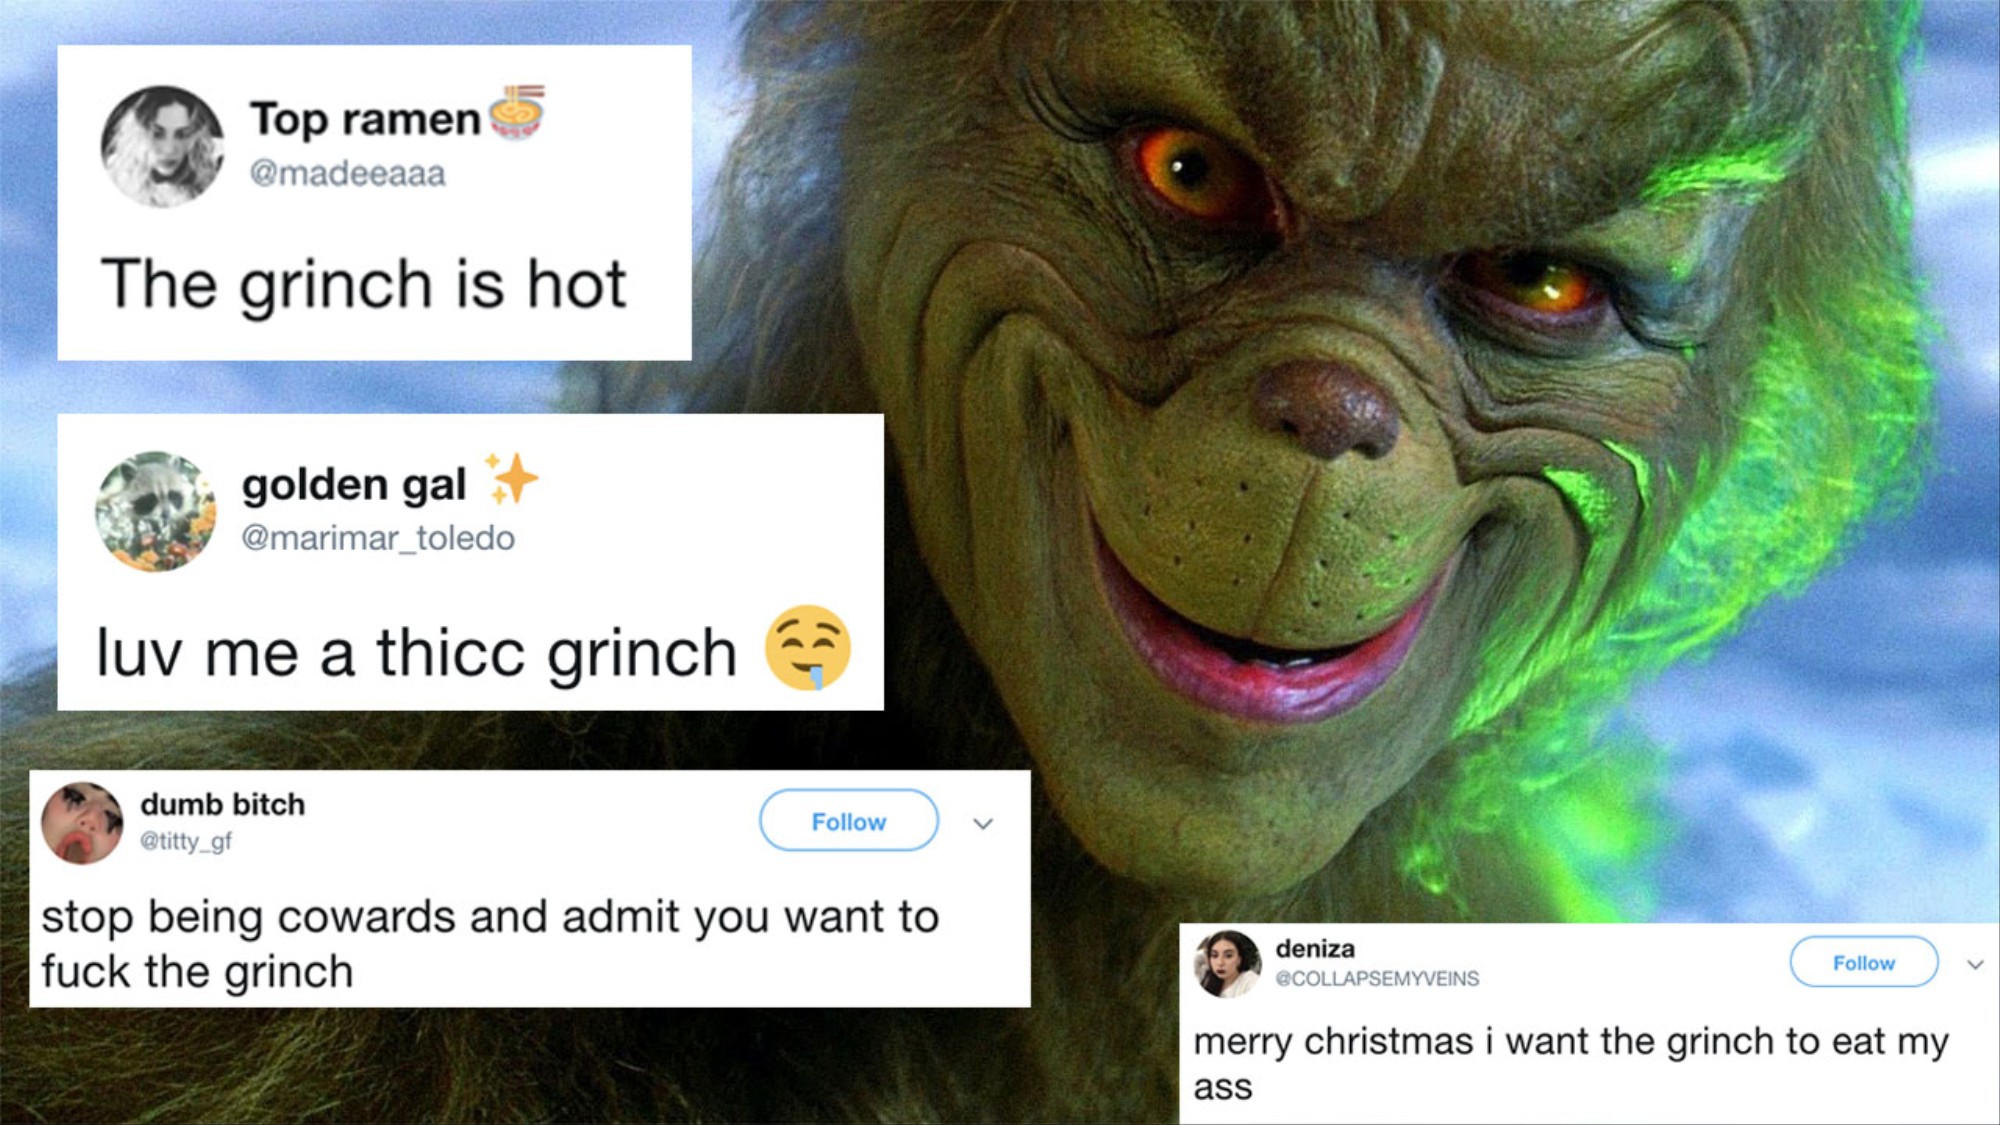 Grinch Porn - People Want to Fuck the Grinch - VICE